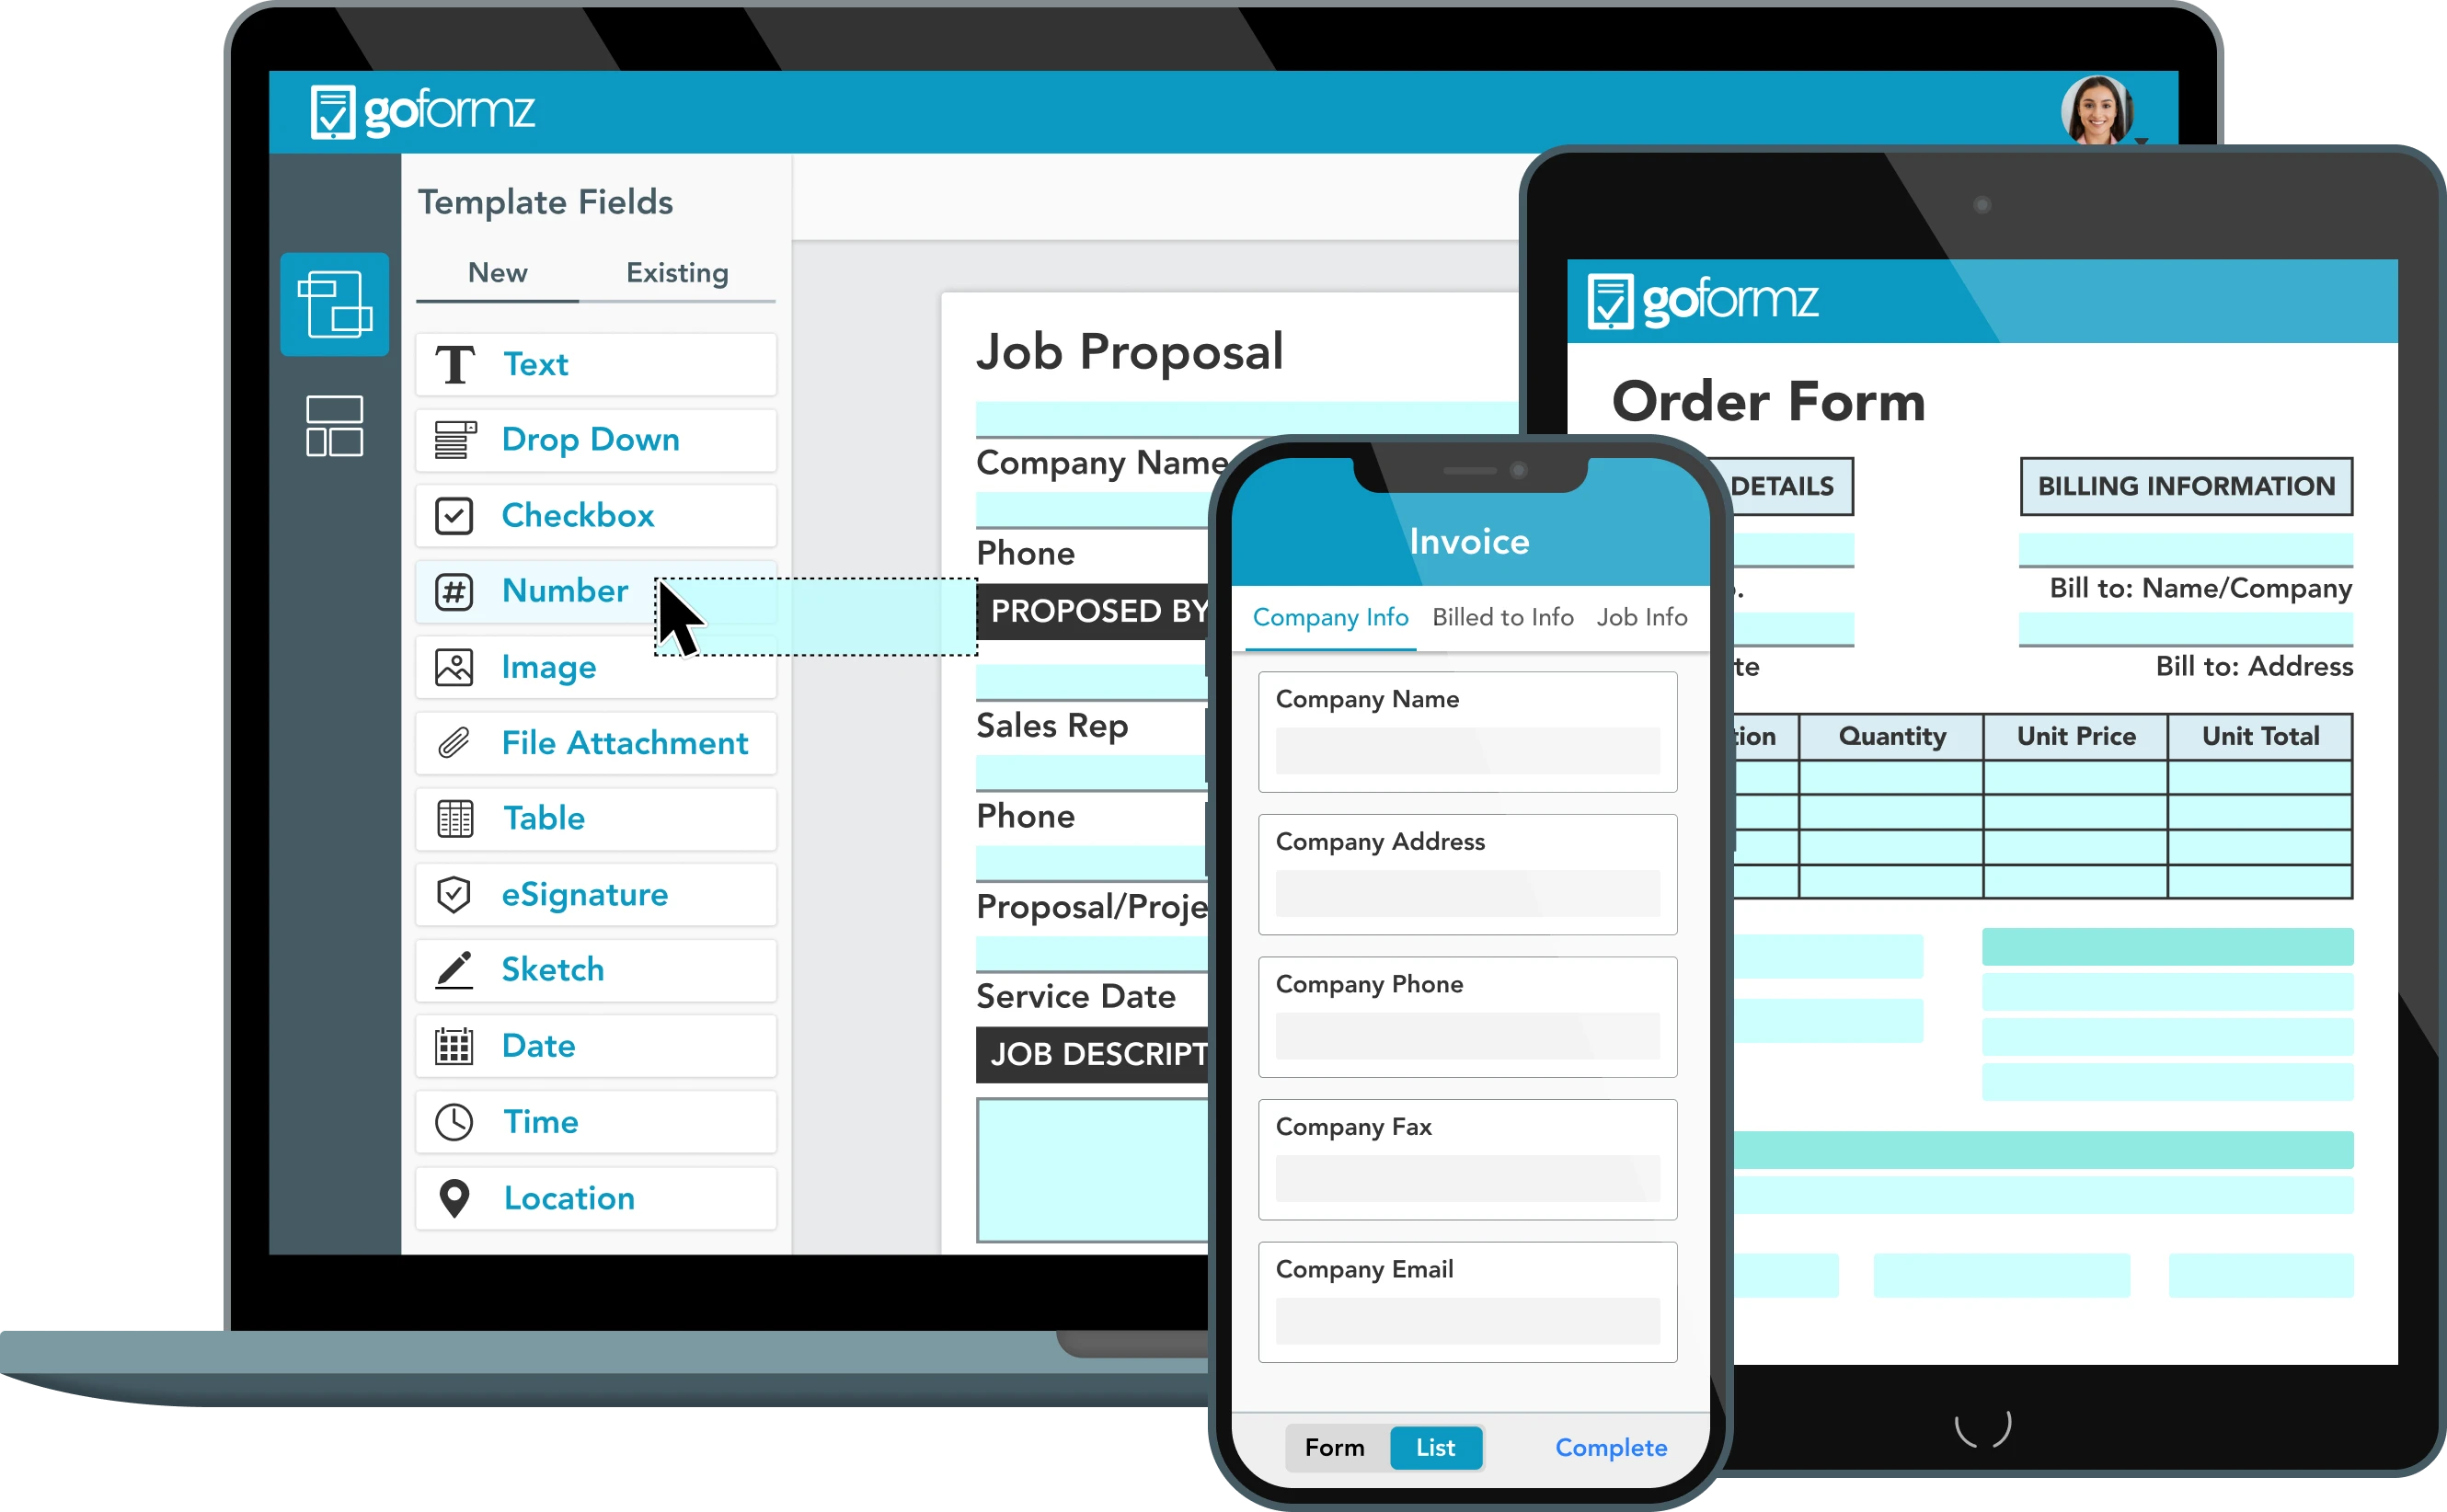 GoFormz makes it easy to share and store form data.